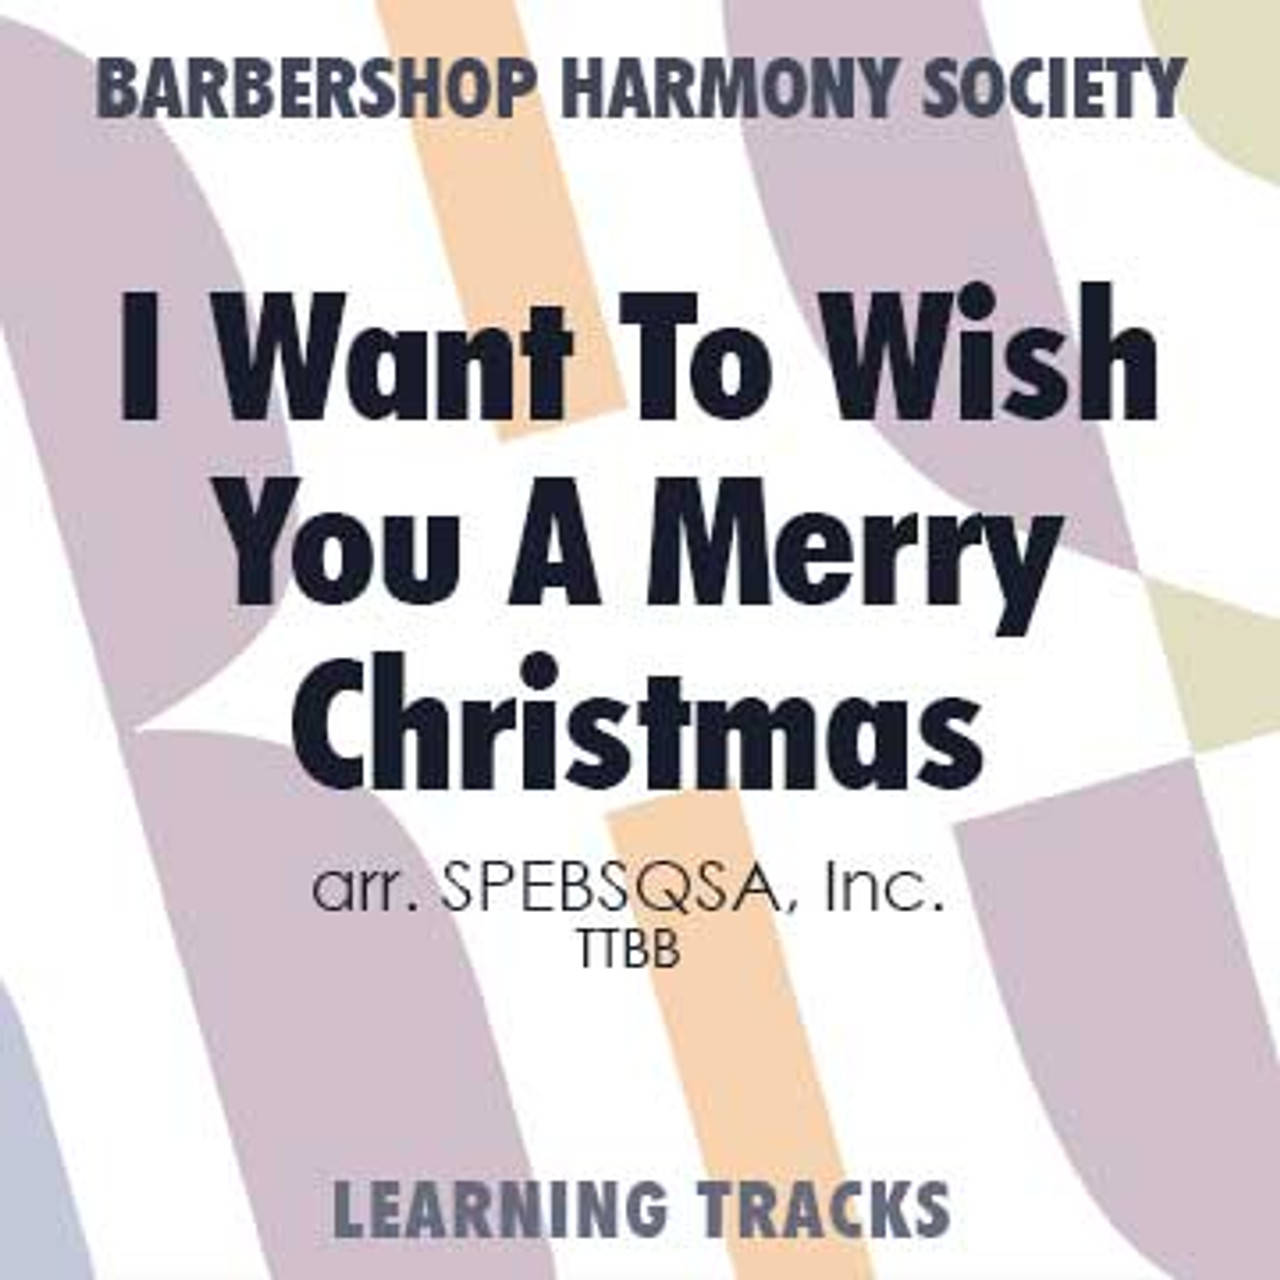 I Want To Wish You A Merry Christmas (TTBB)  - Digital Learning Tracks for 7699